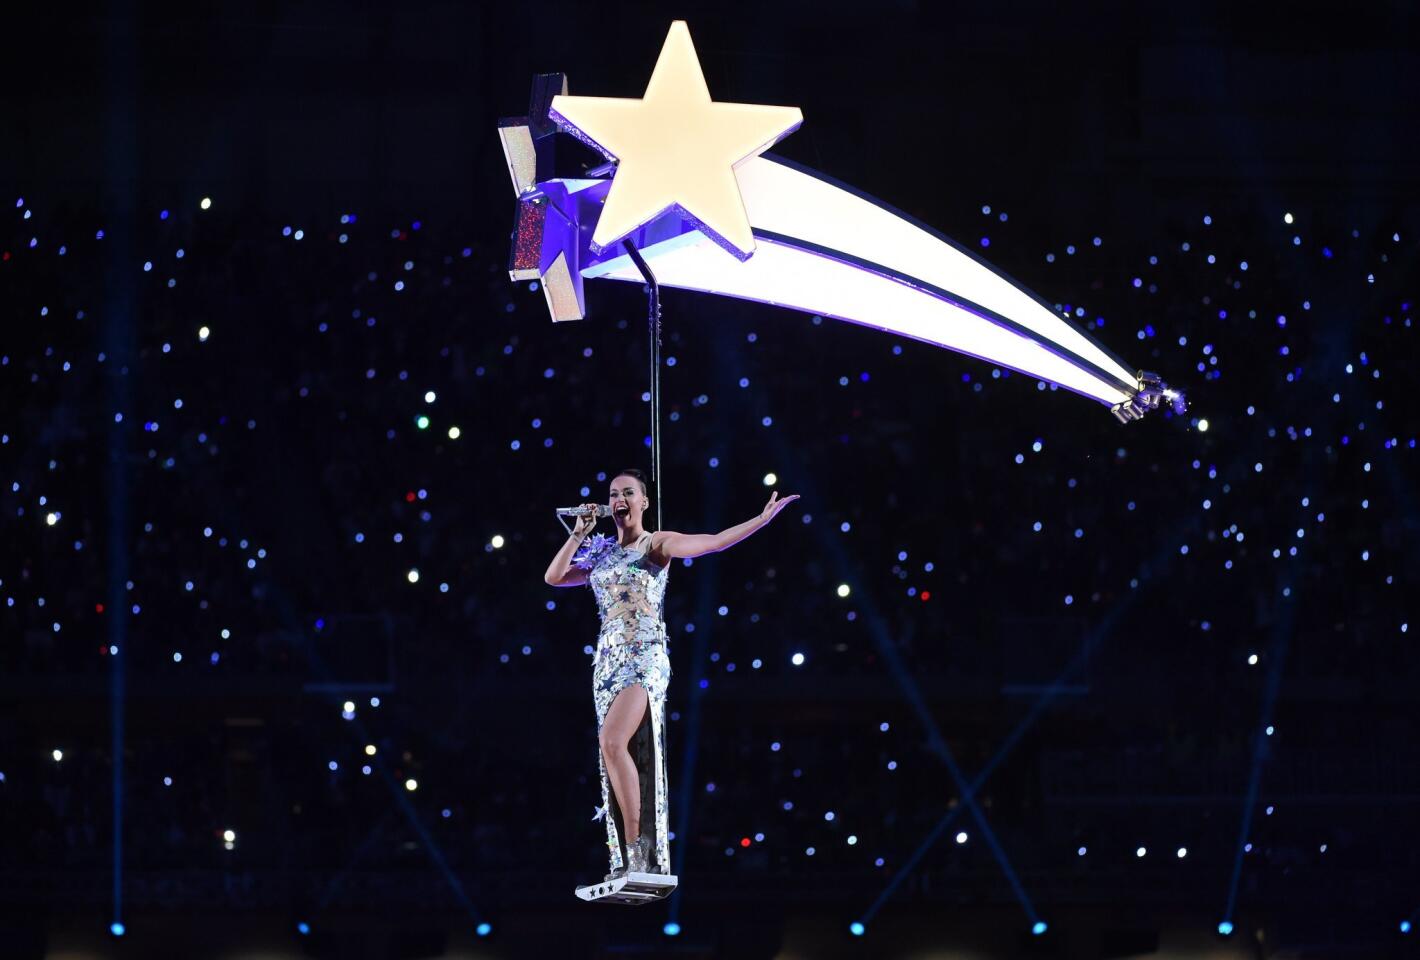 Katy Perry performs during the Super Bowl XLIX halftime show.